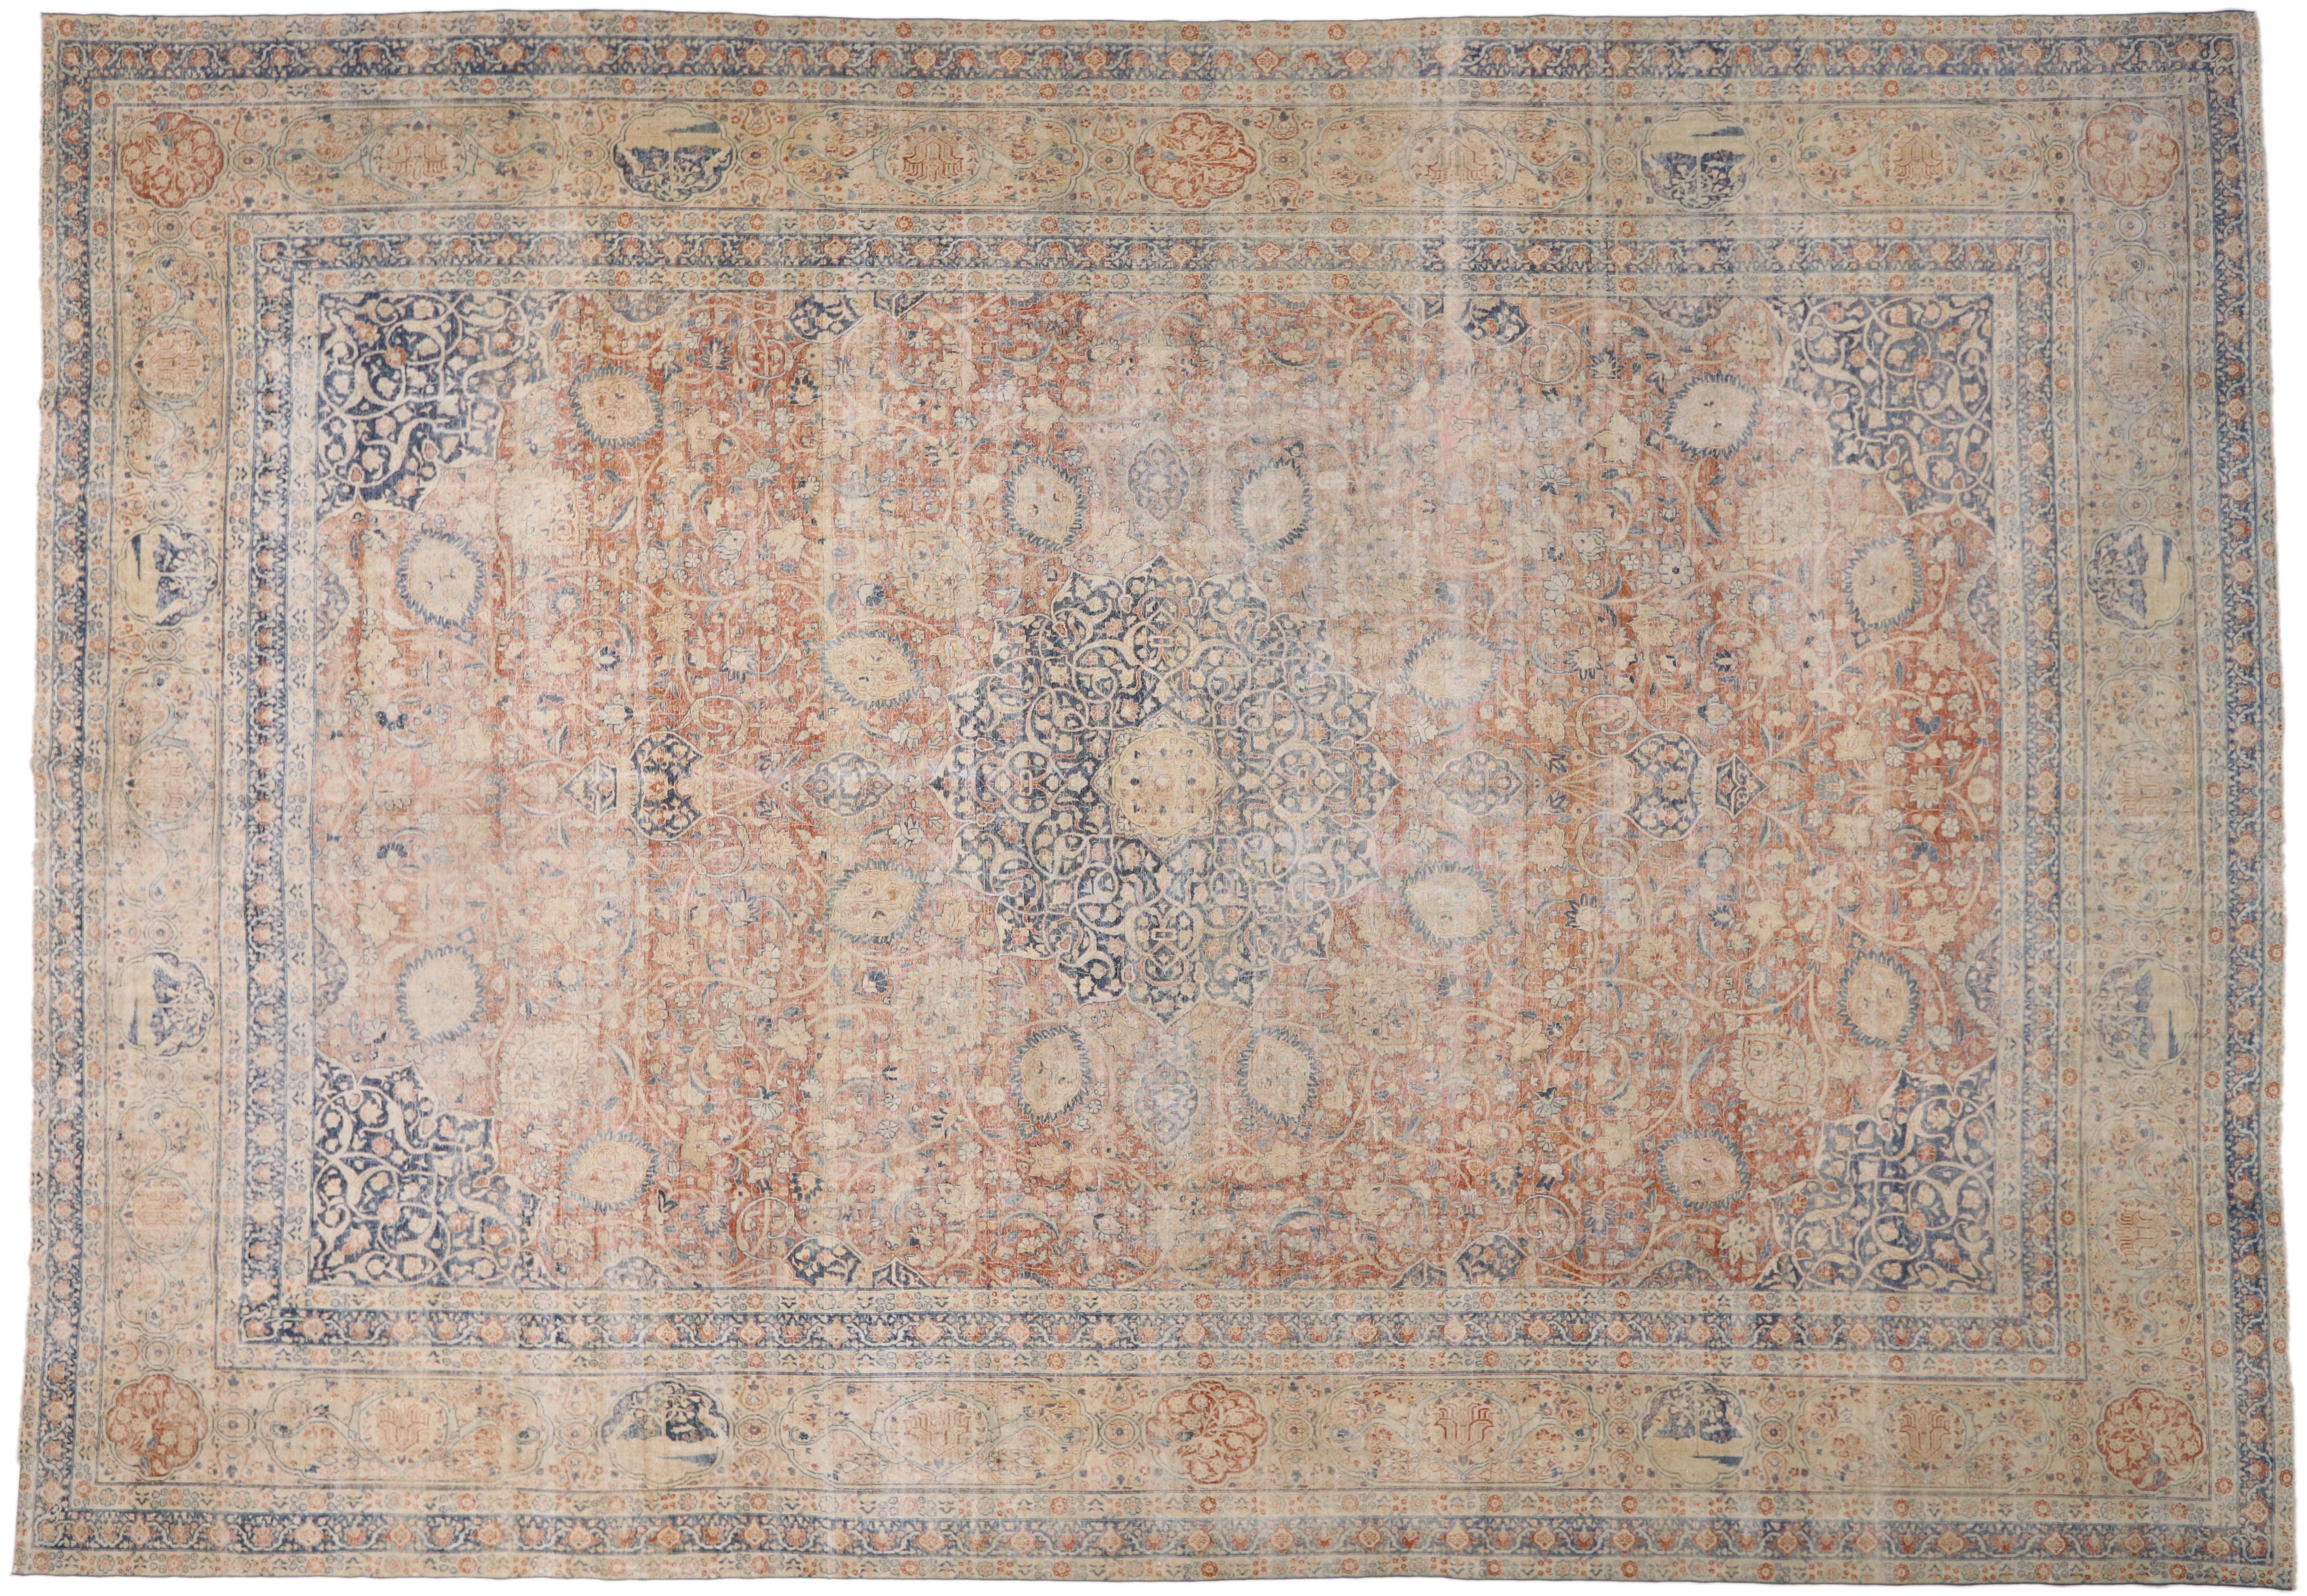 Distressed Antique Persian Tabriz Palace Rug with Rustic Relaxed Federal Style 3